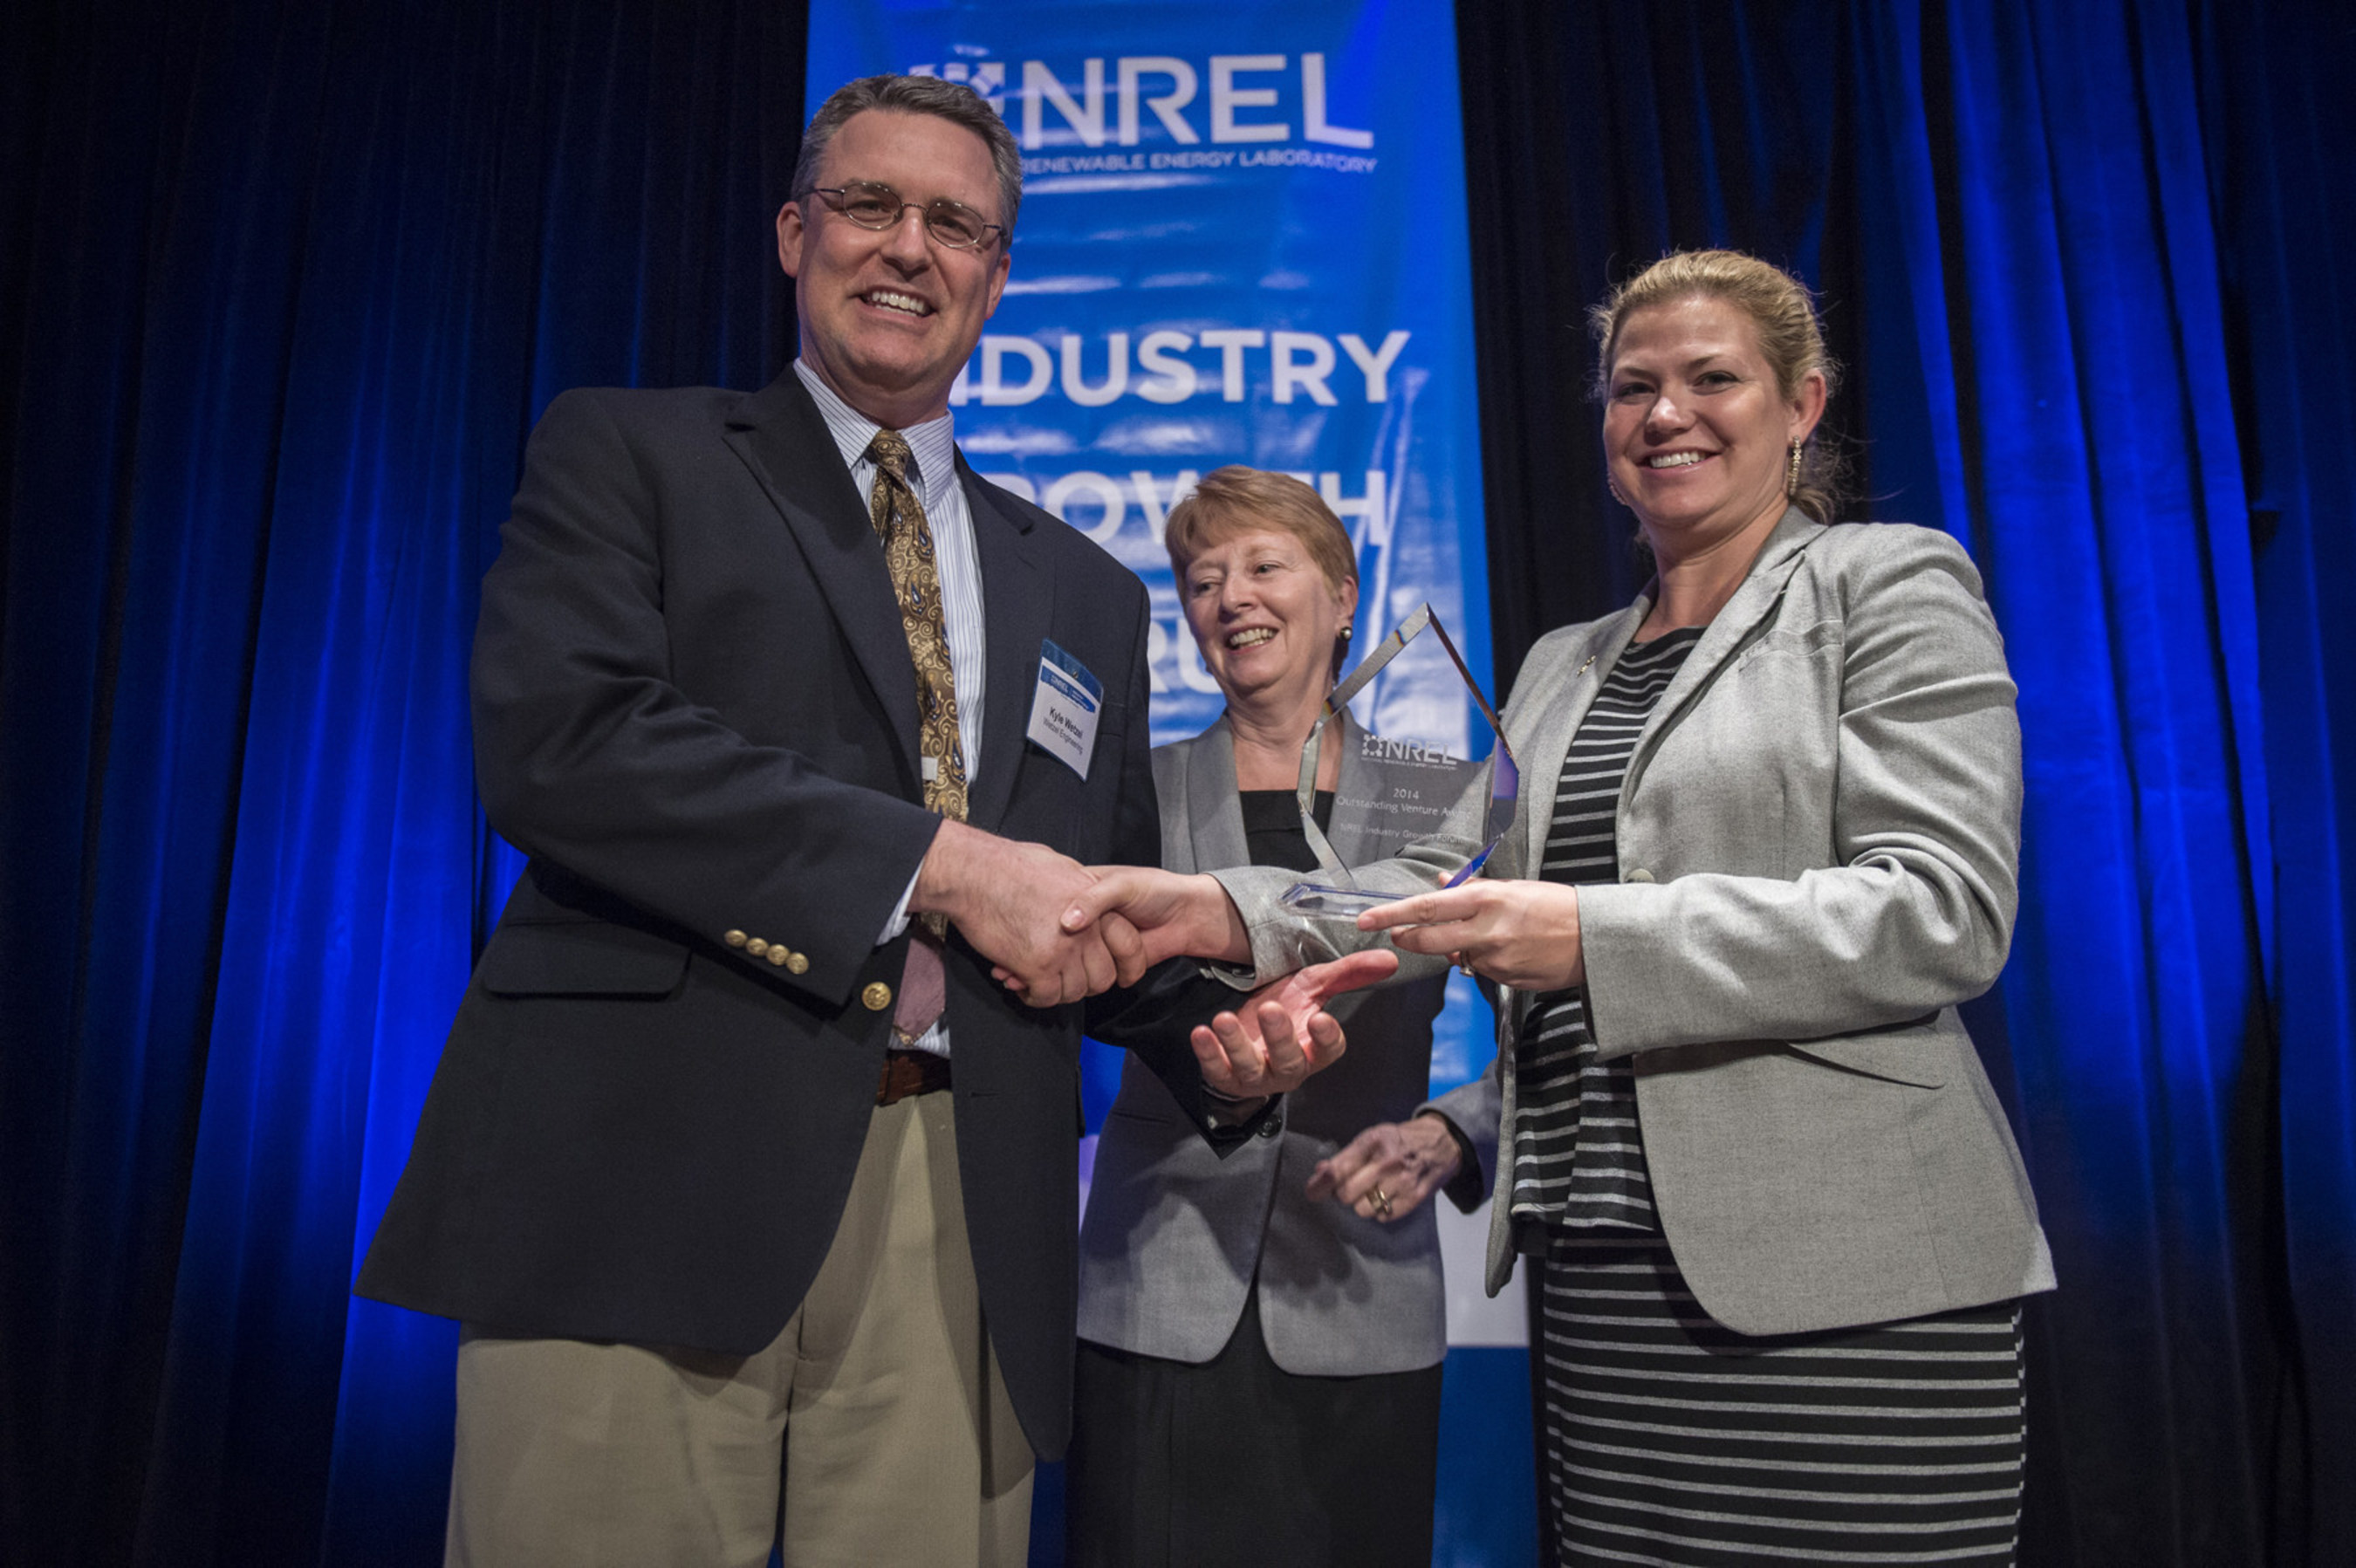 Kyle Wetzel, CTO/Founder of Wetzel Blade receives the Outstanding Venture award for from Bobi Garrett, NREL, and Ashley Grosh, Wells Fargo, at the NREL Industry Growth Forum. The Pflugerville, TX, startup has developed an innovative, field-assembled, component-based wind turbine blade. (Photo by DENNIS SCHROEDER/NREL)